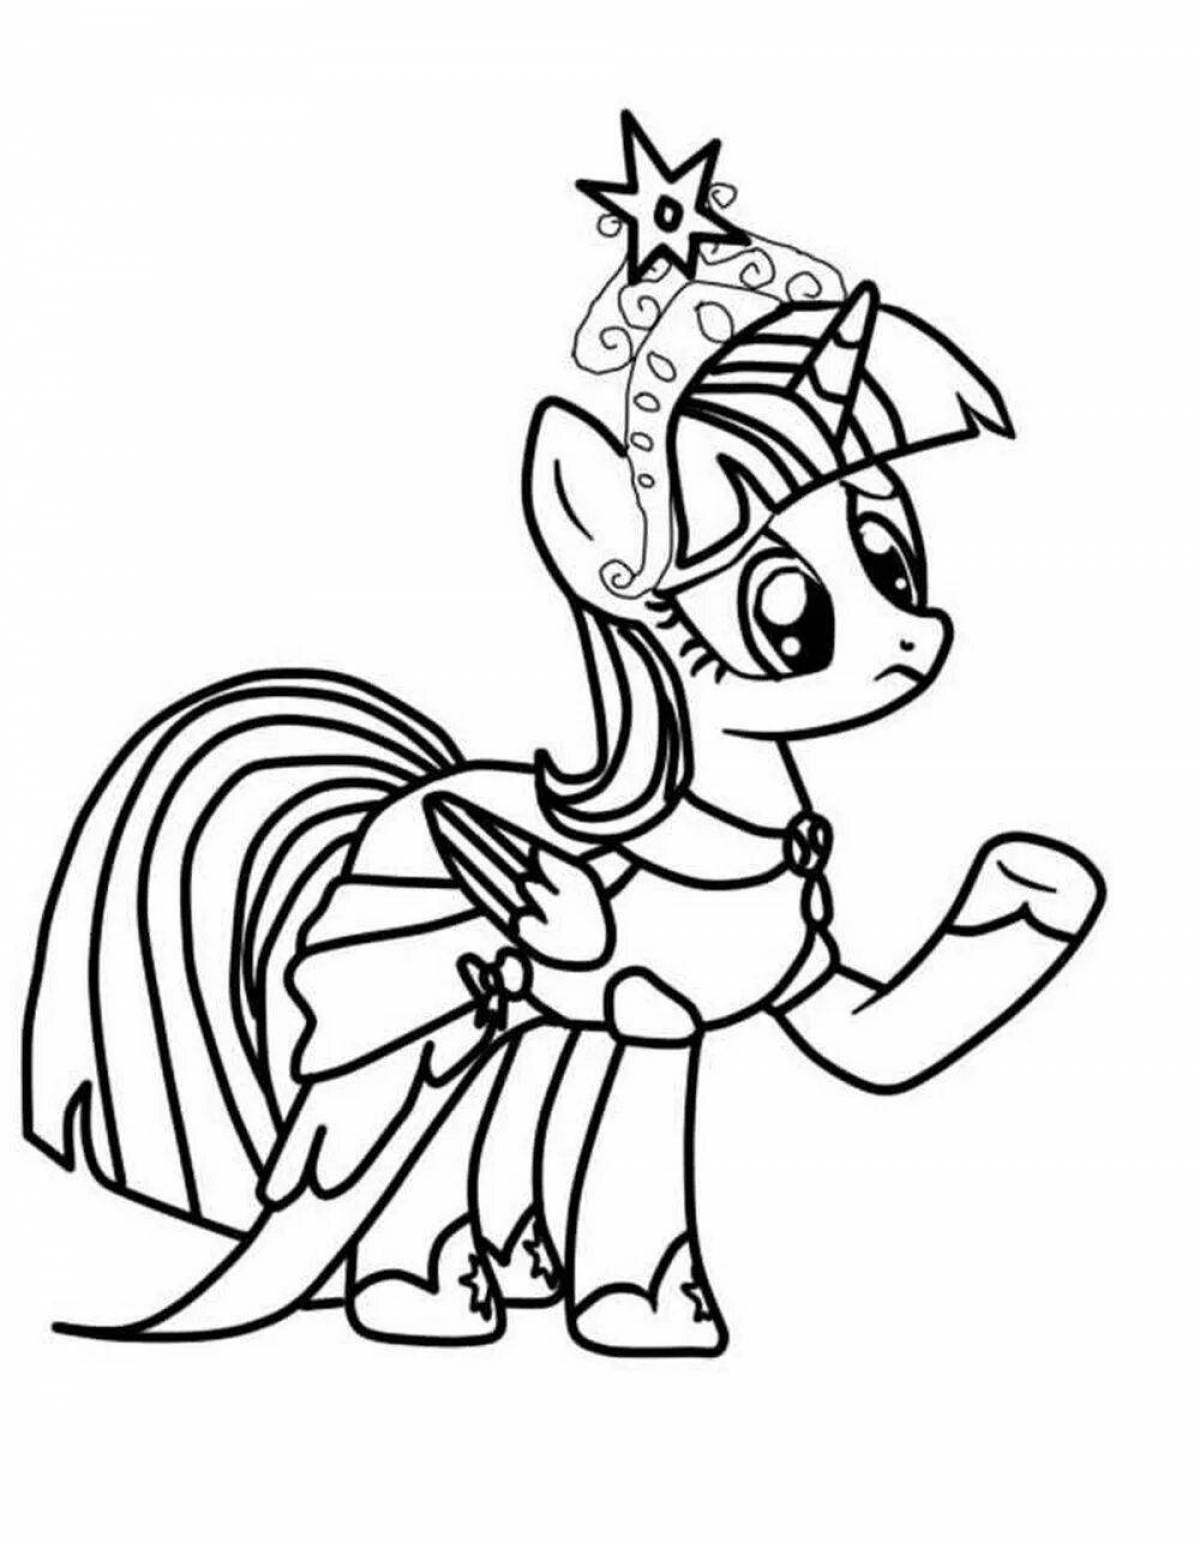 Vibrant ponyville pony coloring page